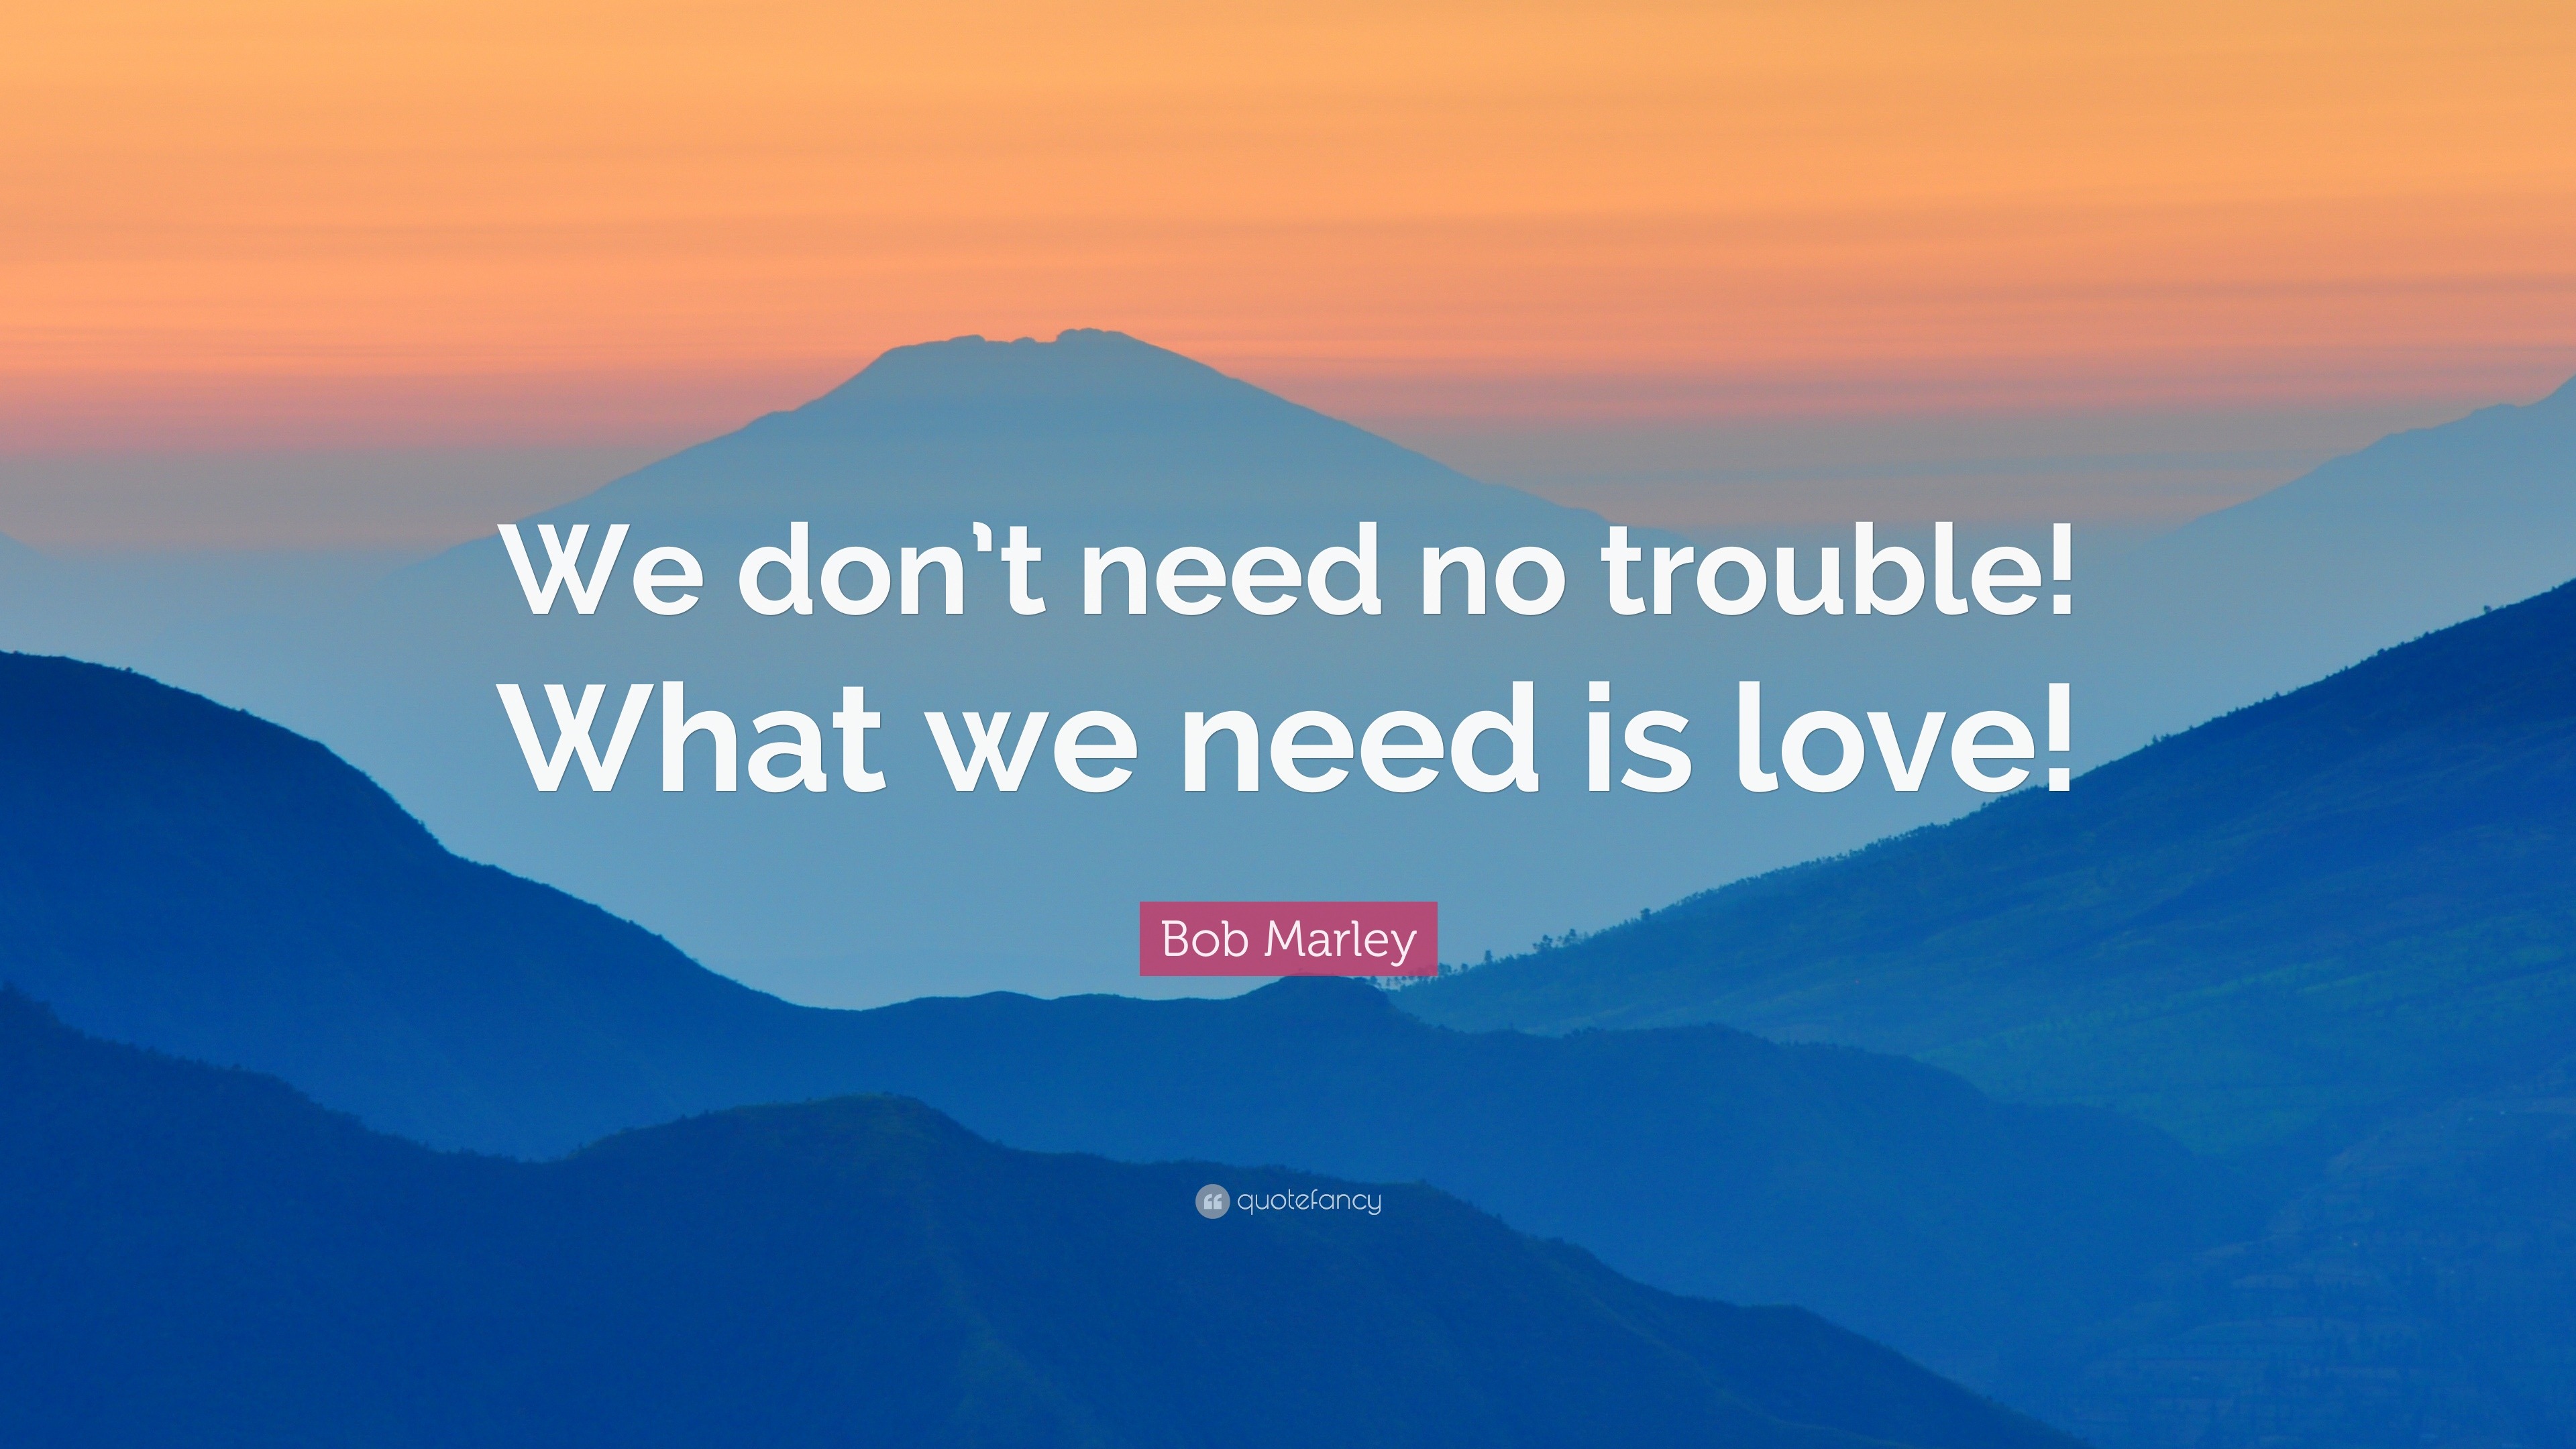 Bob Marley Quote “We don t need no trouble What we need